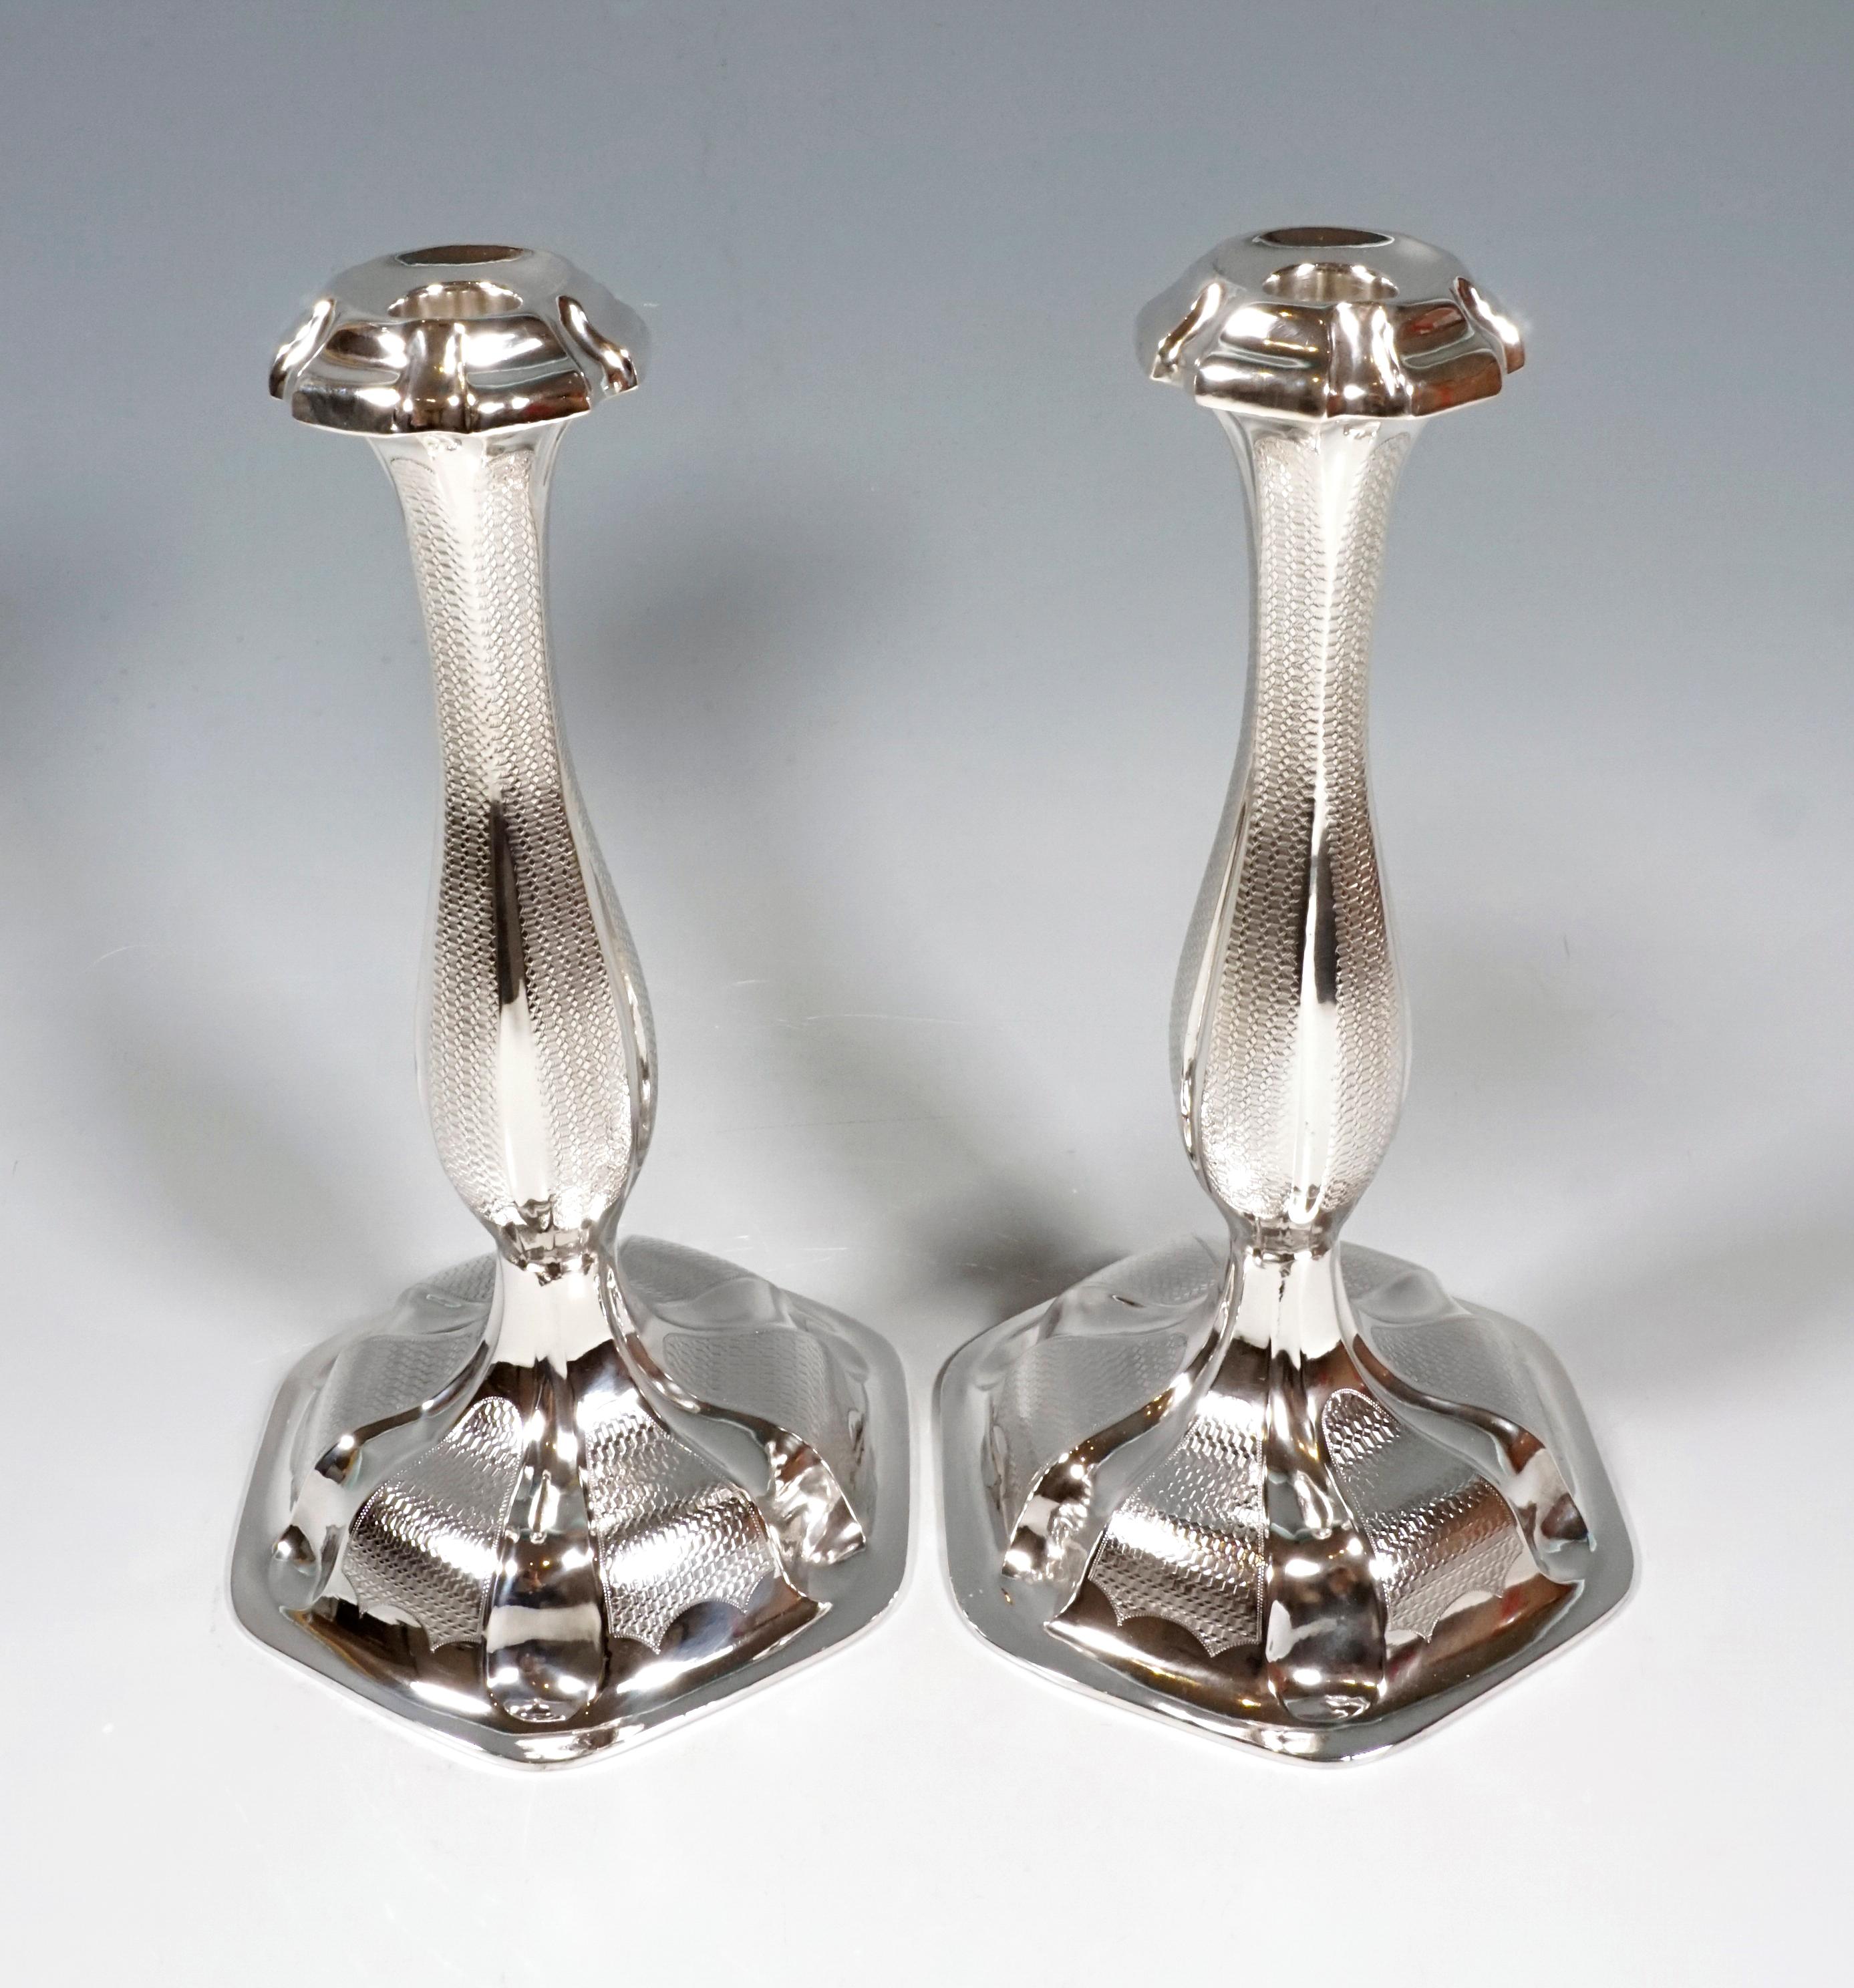 Pair of silver candle holders on a six-pointed, cambered base with guilloche decoration. Curved shaft, engine-turned, with a slightly flared, vase-shaped spout with a six-pointed rosette.

Branded by the Wheel mark, Austrian official hallmark: 13